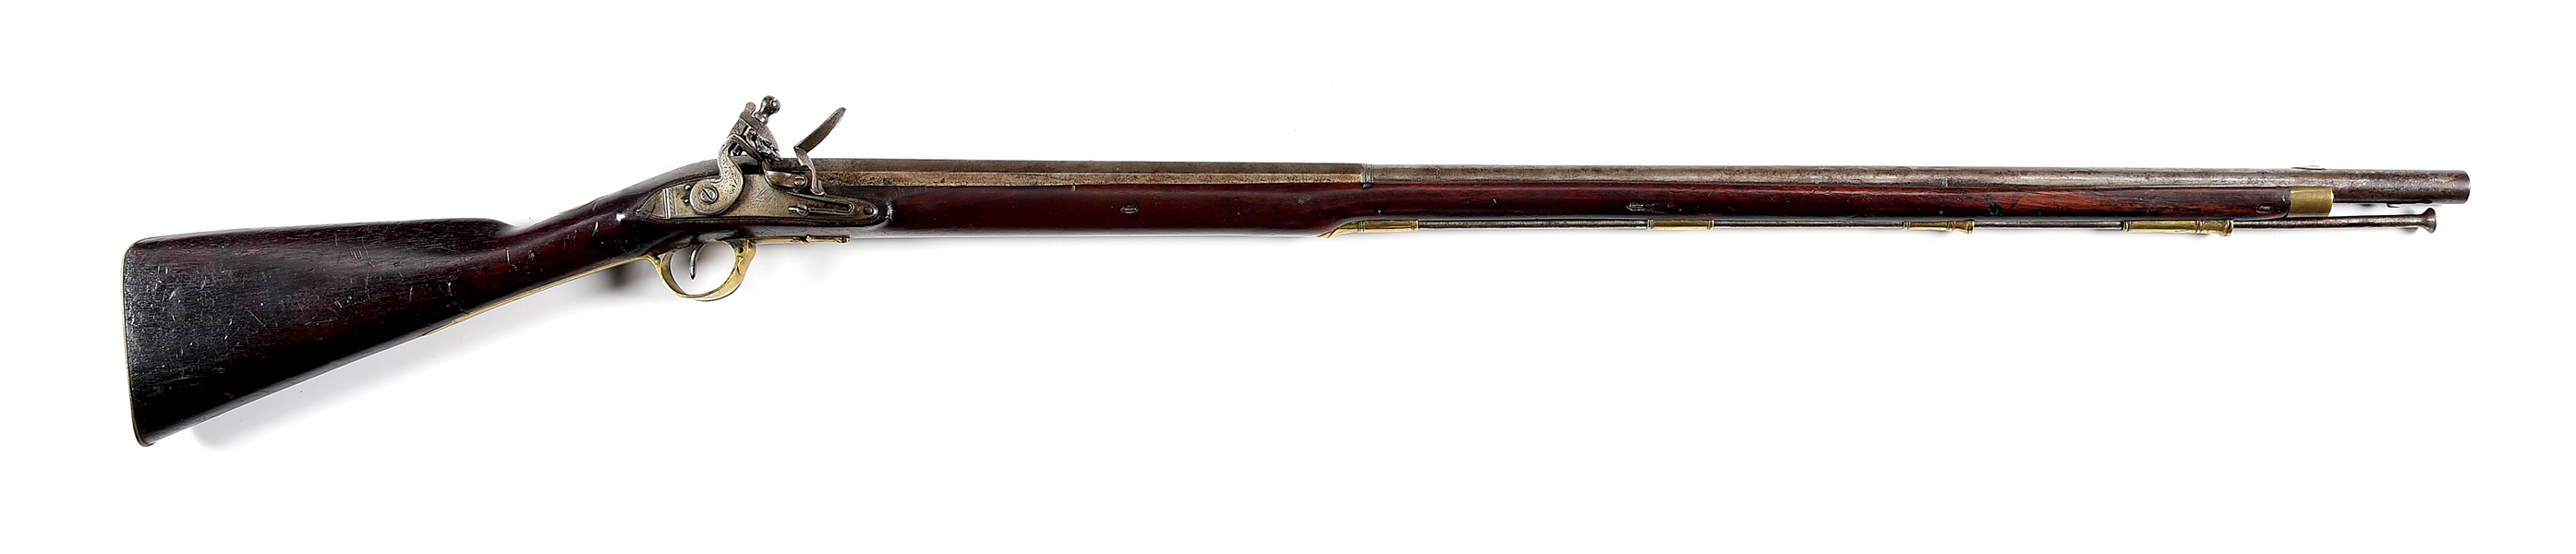 (A) DOCUMENTED WAR OF 1812 PERIOD FLINTLOCK FUSIL MARKED ROBERT HODGSON AND THOMPSON ON LOCK.